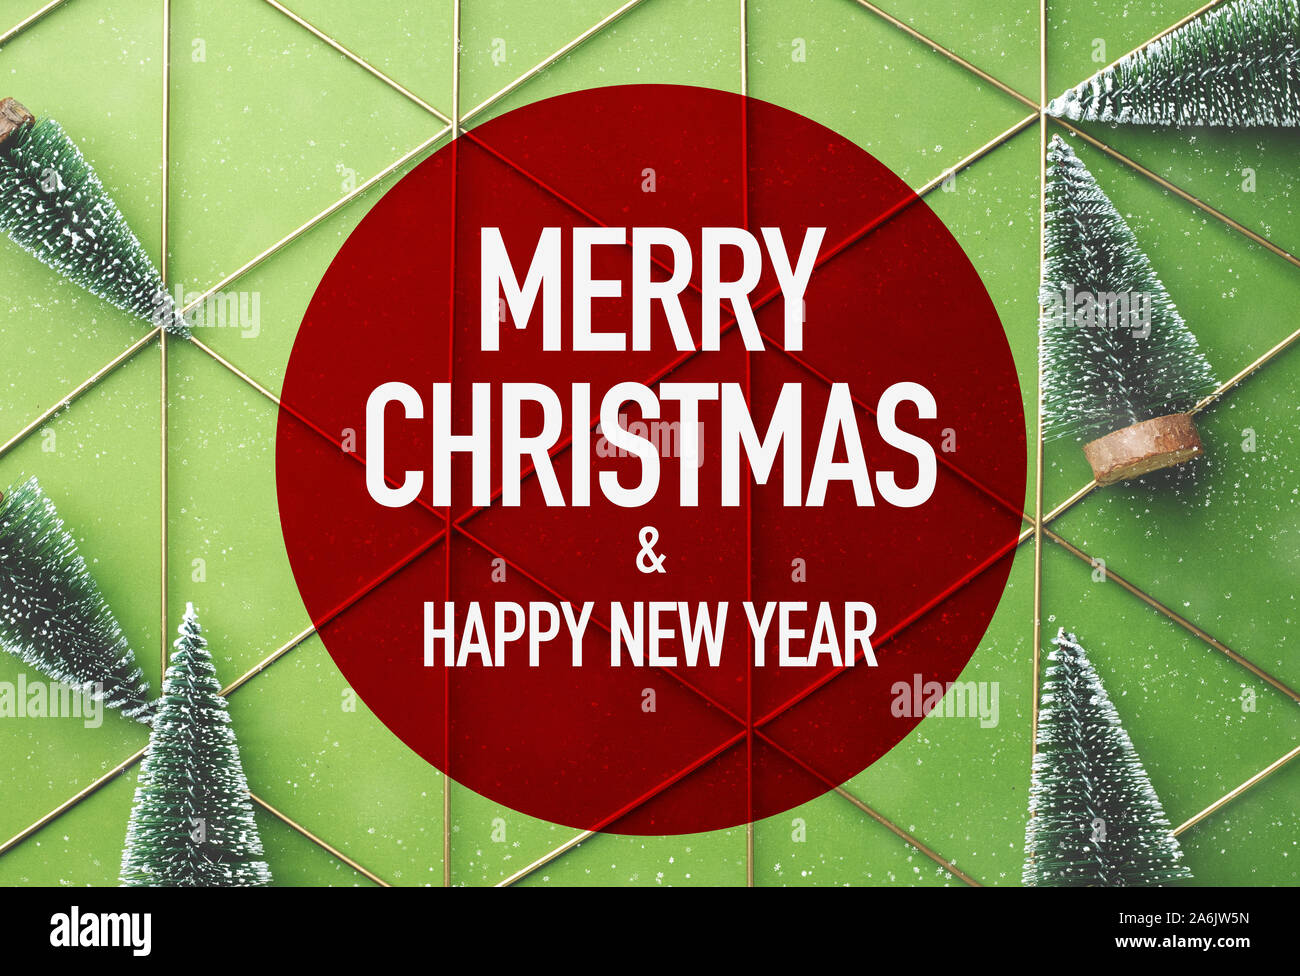 Merry Christmas and Happy New Year in red circle with green christman tree on  green lime background with snow falling.holiday celebration greeting ca Stock Photo